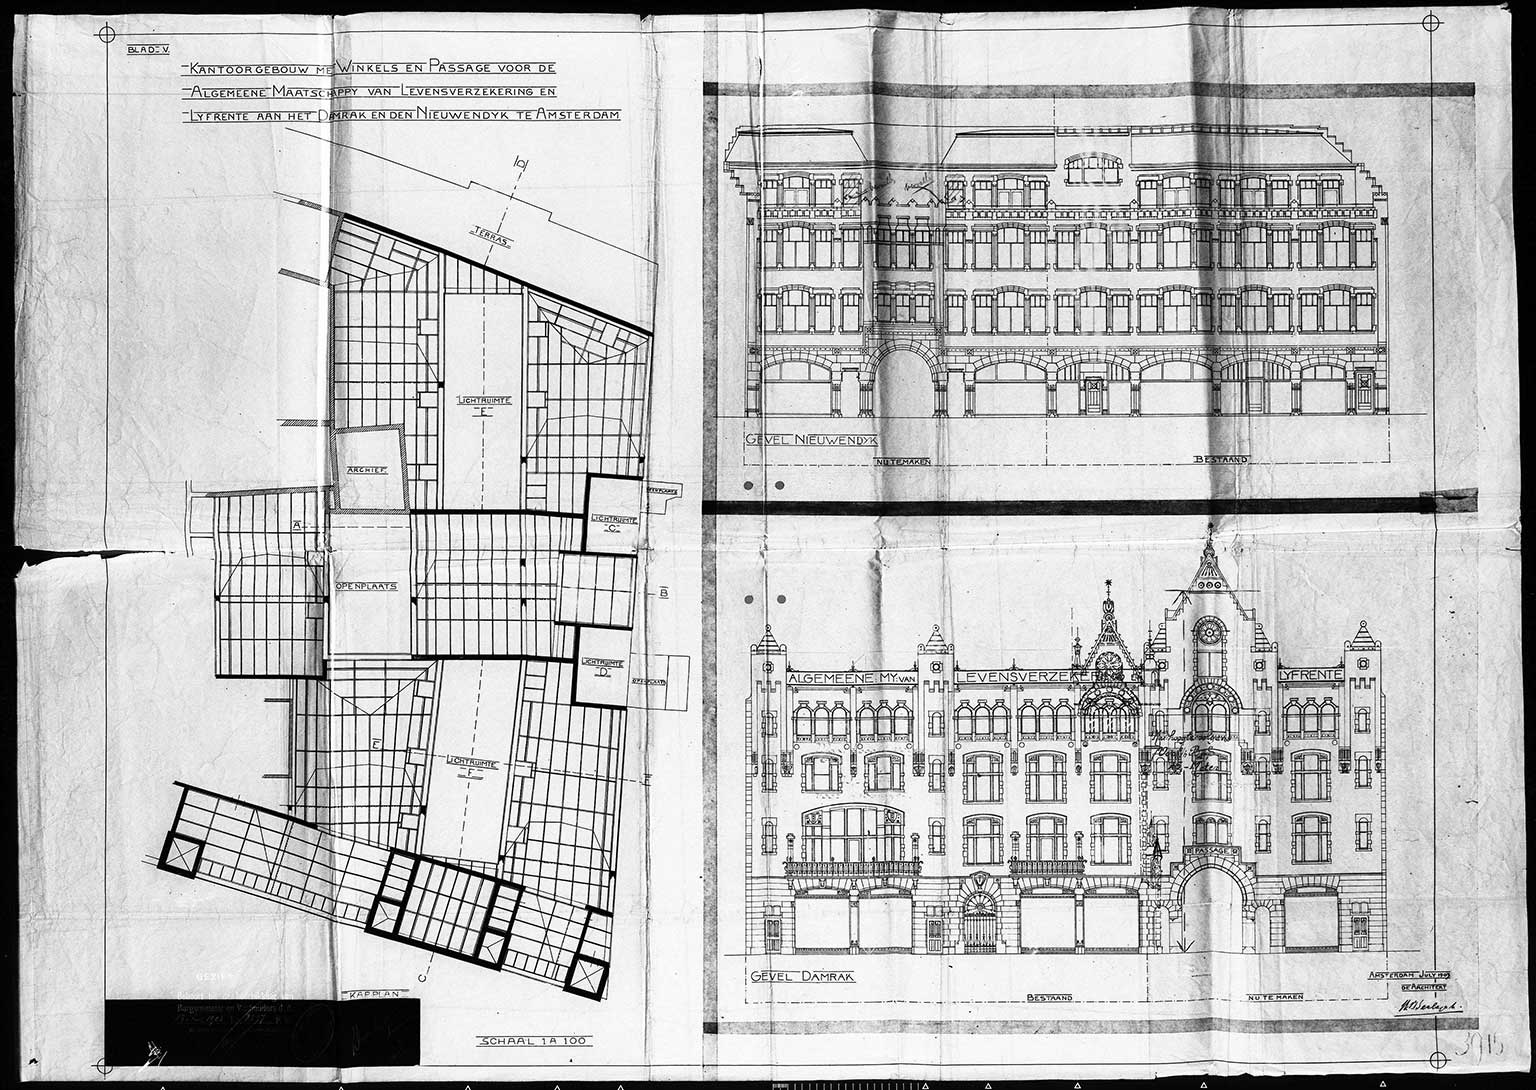 Design by Berlage for the Beurspassage, Amsterdam, 1903